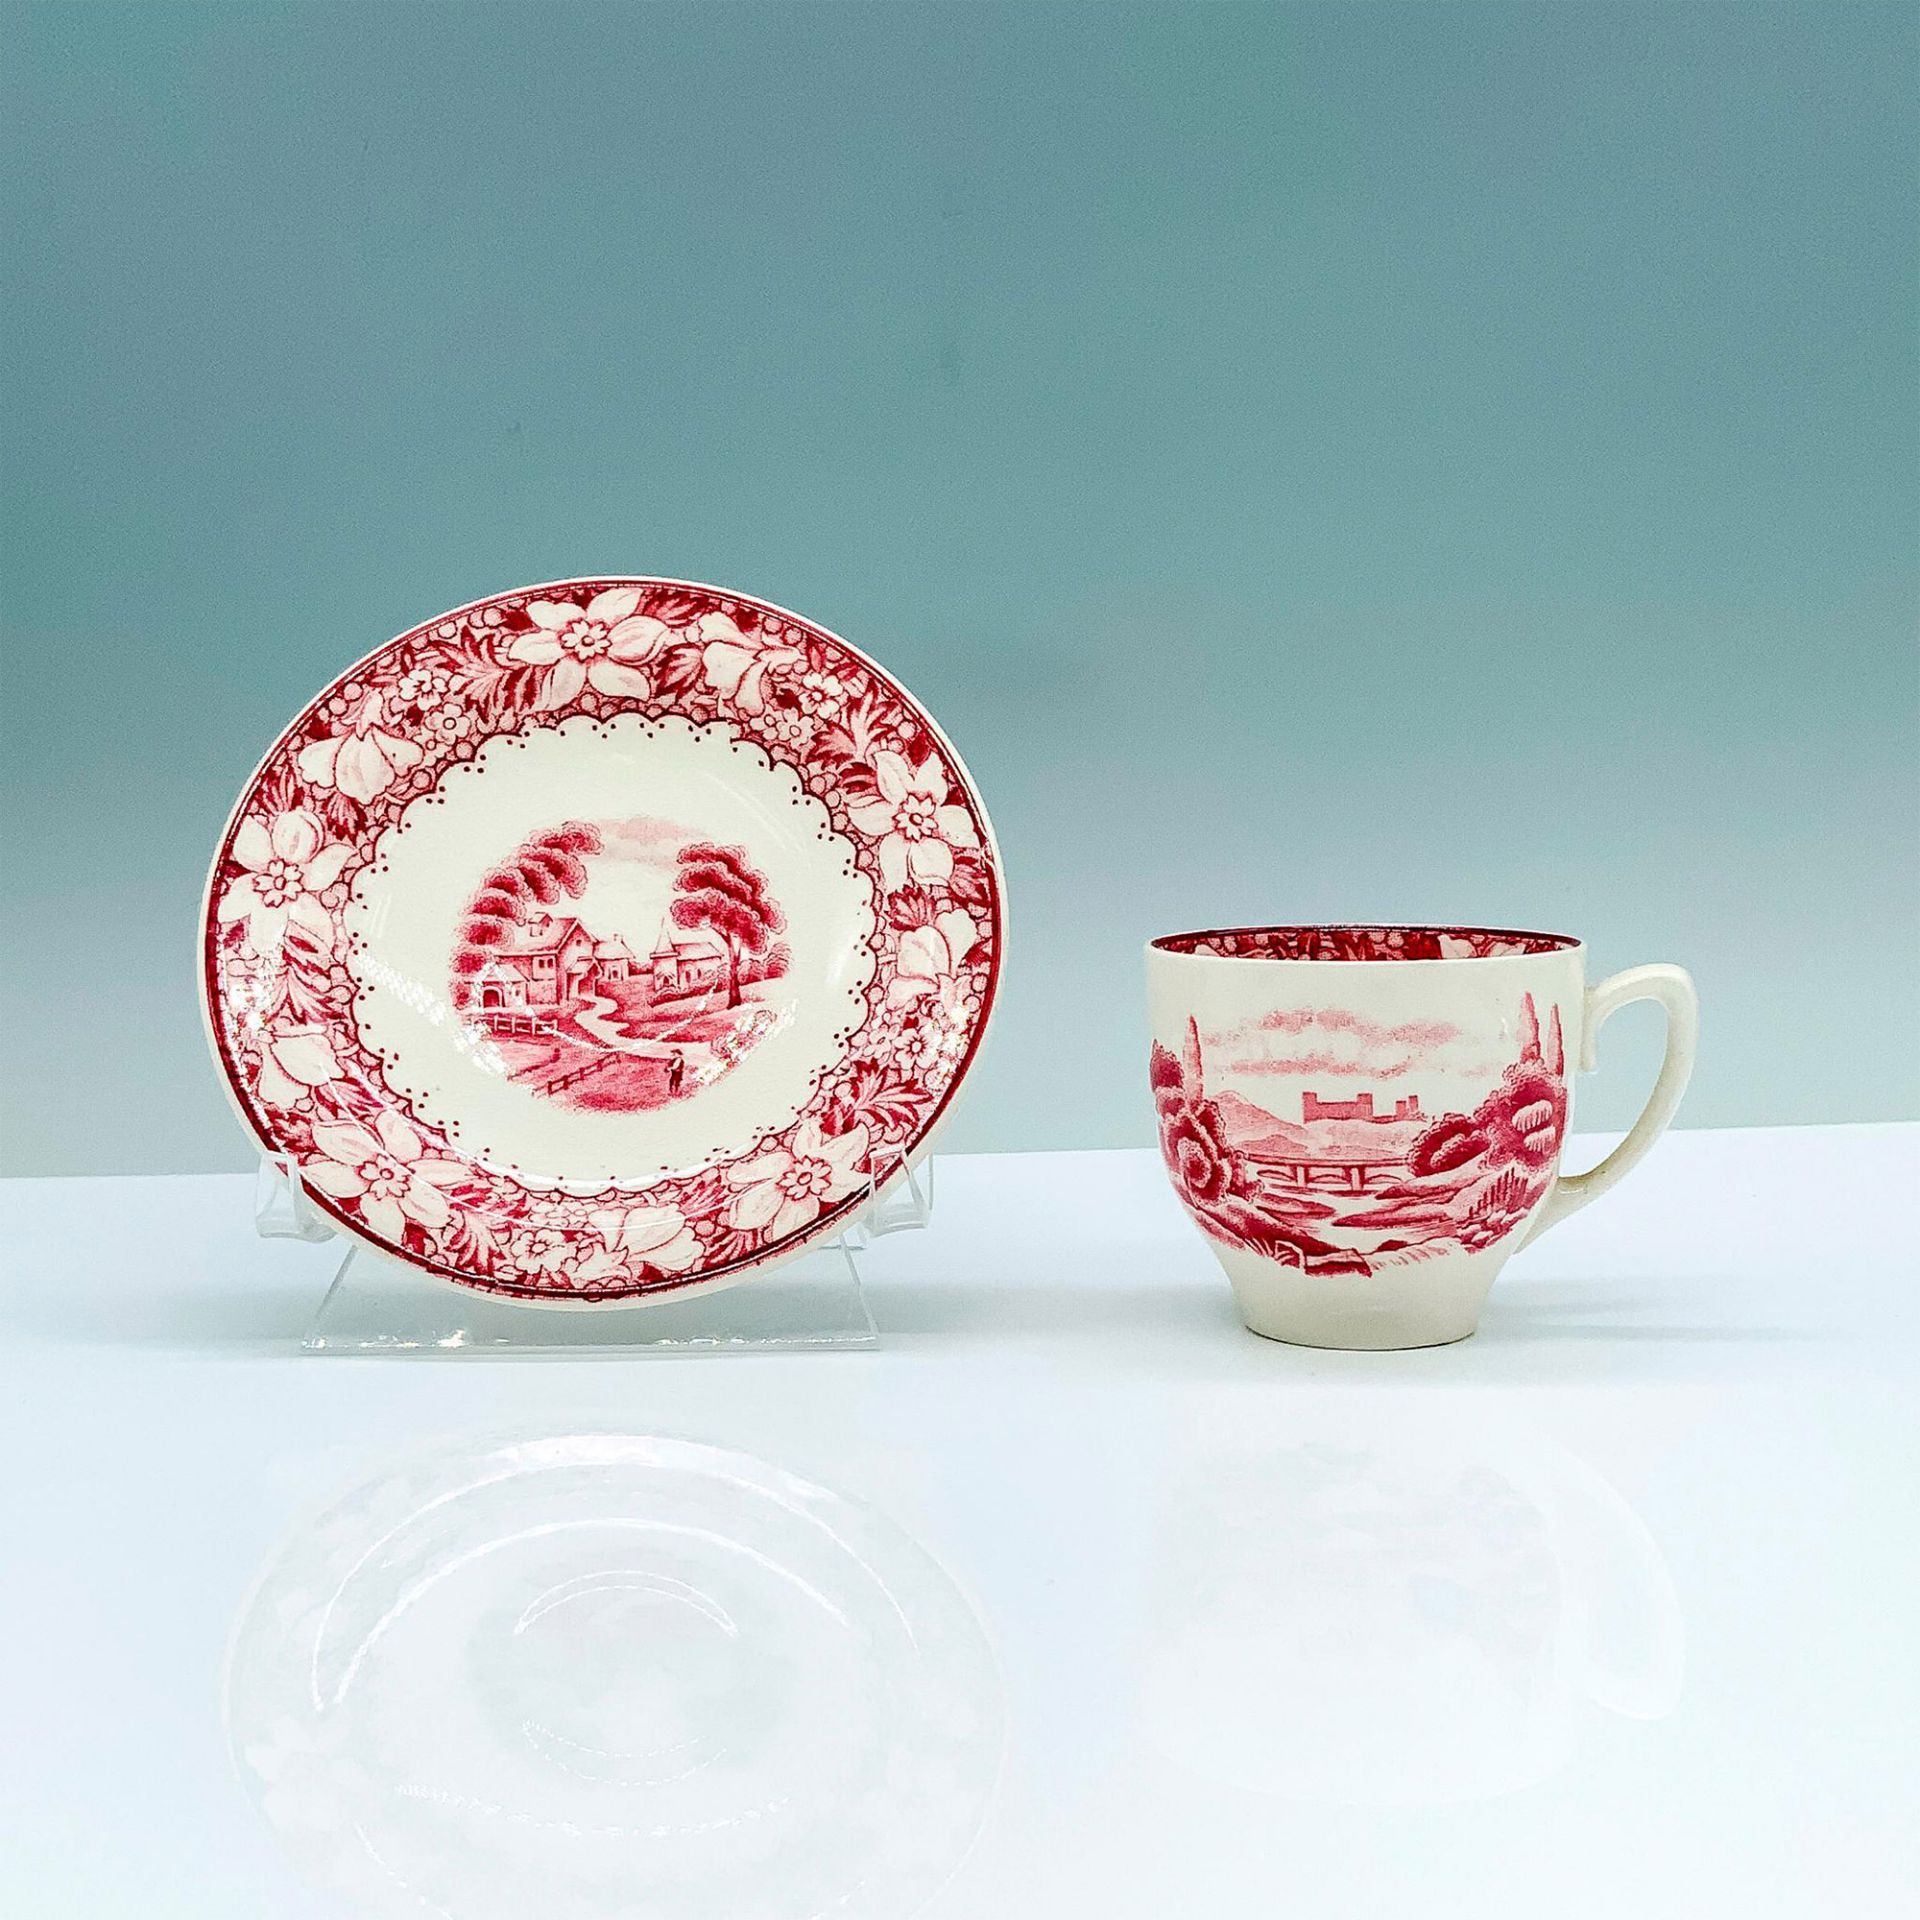 Woods Burslem Teacup and Saucer Set, Colonial - Image 2 of 3